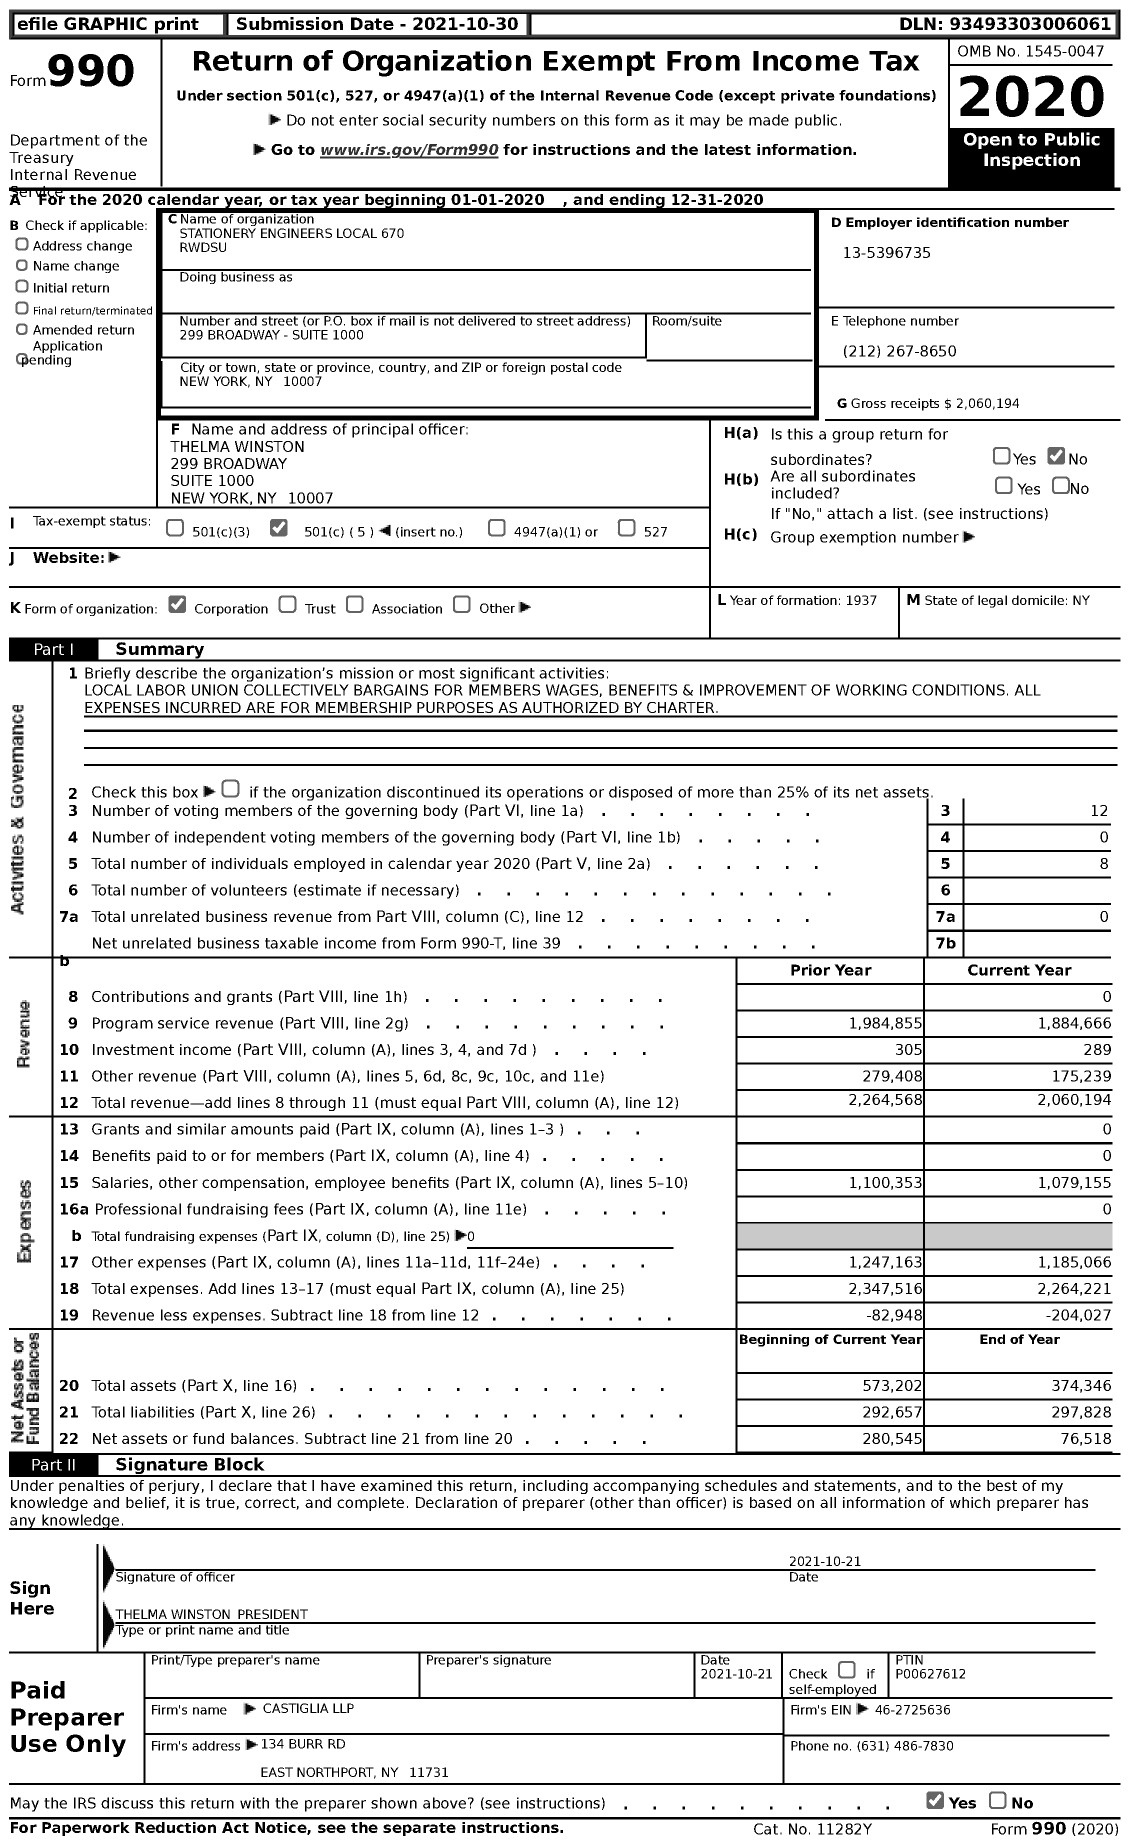 Image of first page of 2020 Form 990 for Retail Wholesale and Department Store Union - 670 Rwdsu Stationary Engineers Local